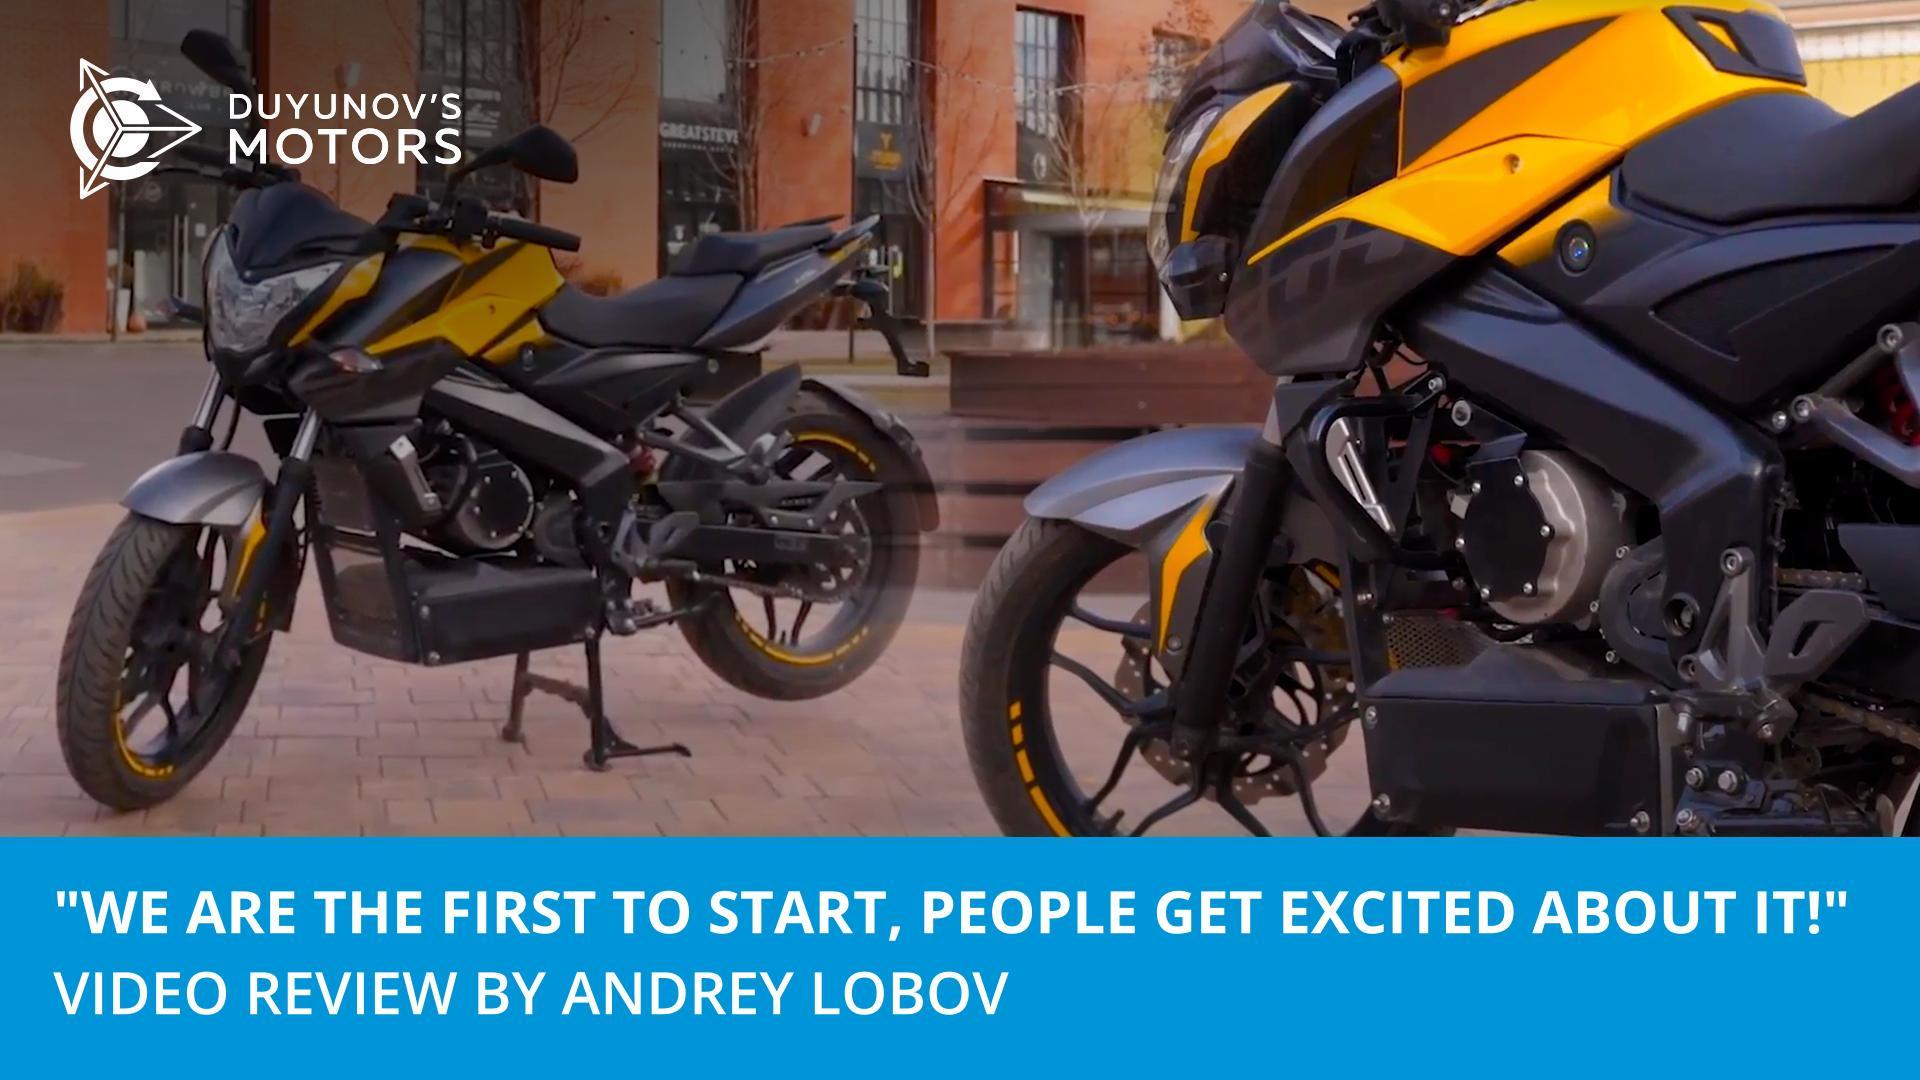 "We are the first to start, people get excited about it!" | Video review by Andrey Lobov